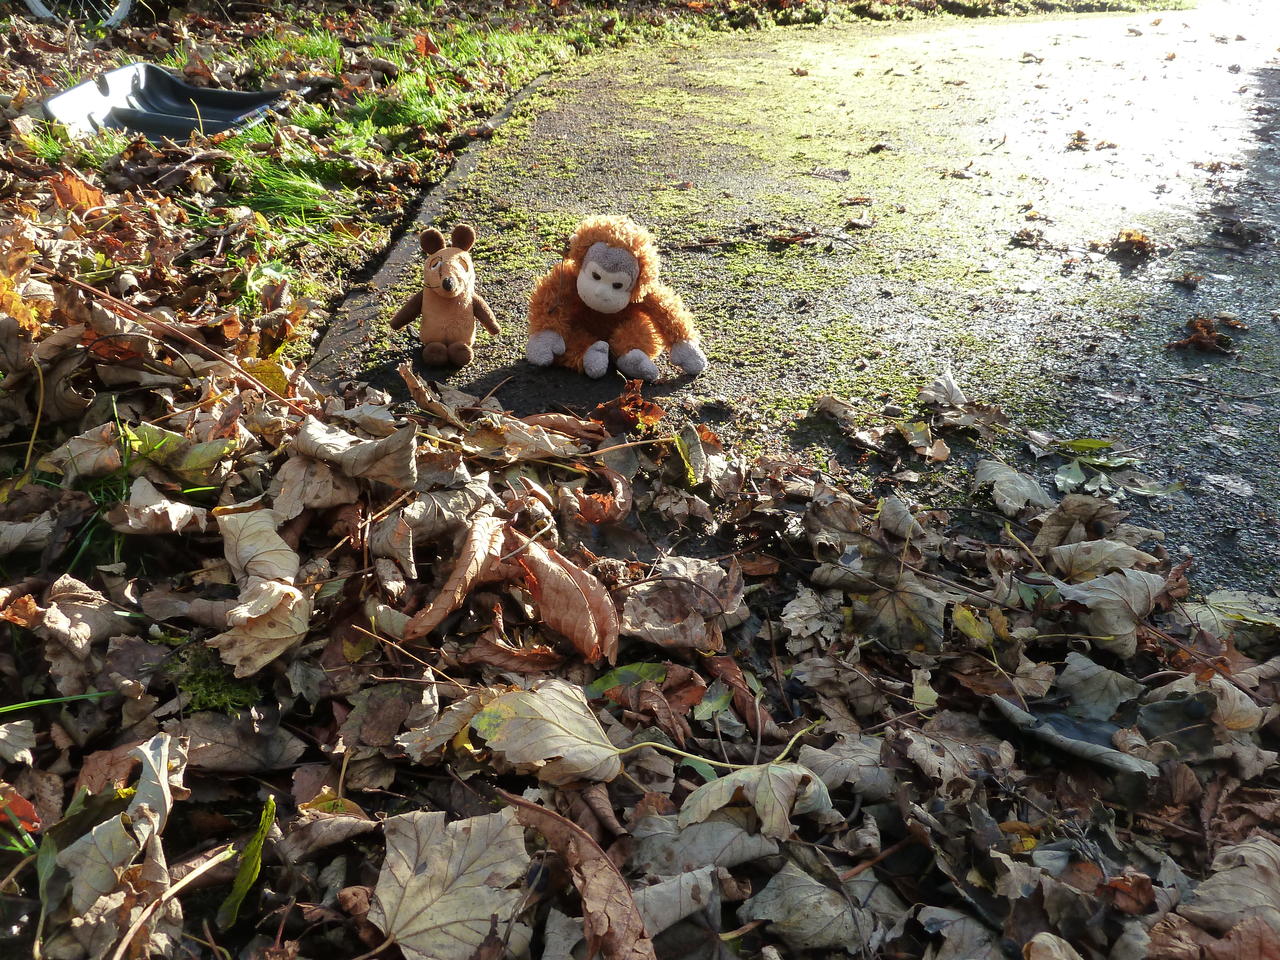 Pongo and Mouse sitting on the path, which is partly cleaned from leaves